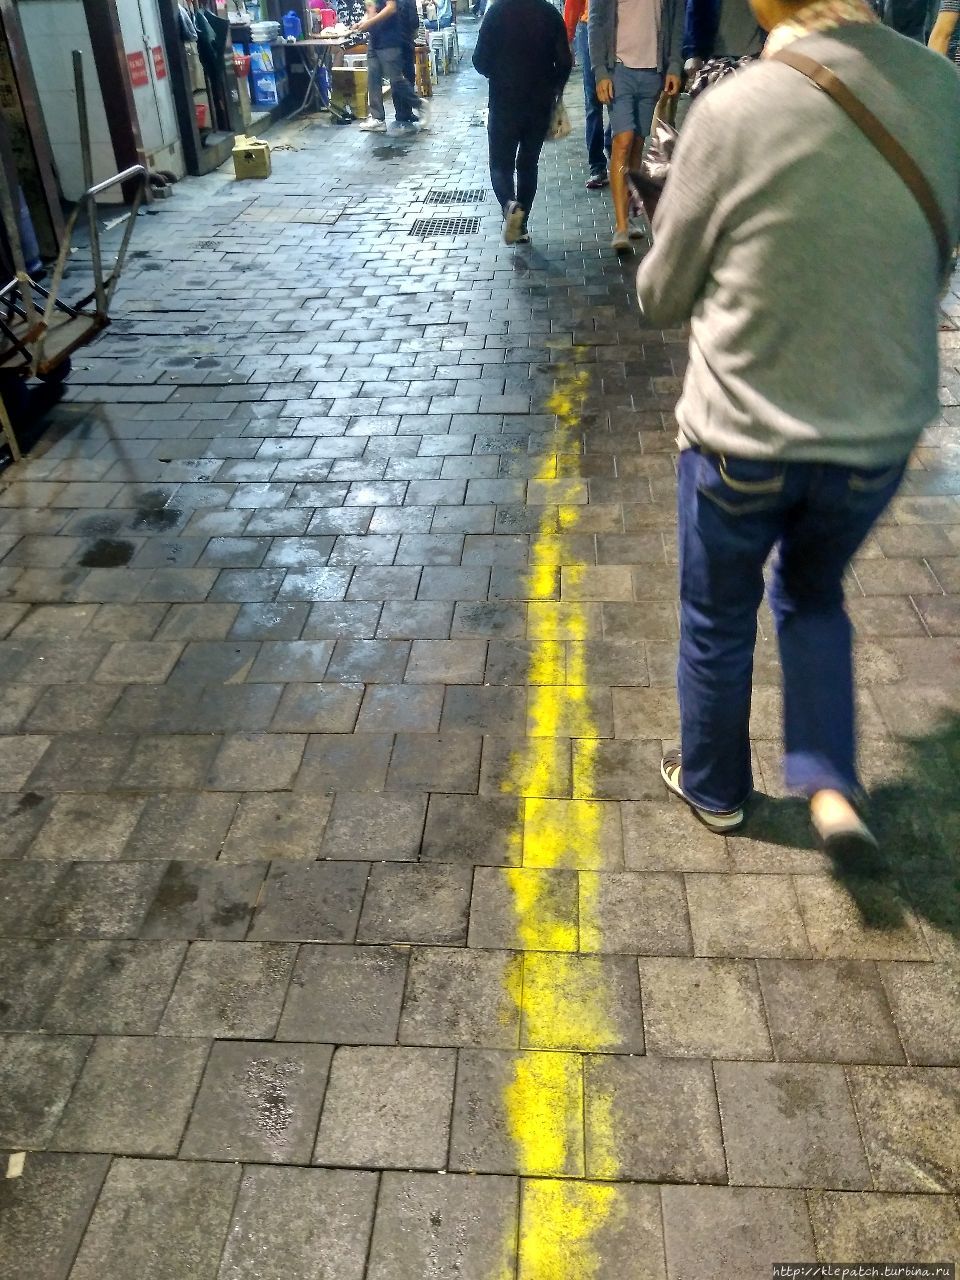 — Do you have a toilet?
— Just follow the yellow line) Шек-О, Гонконг